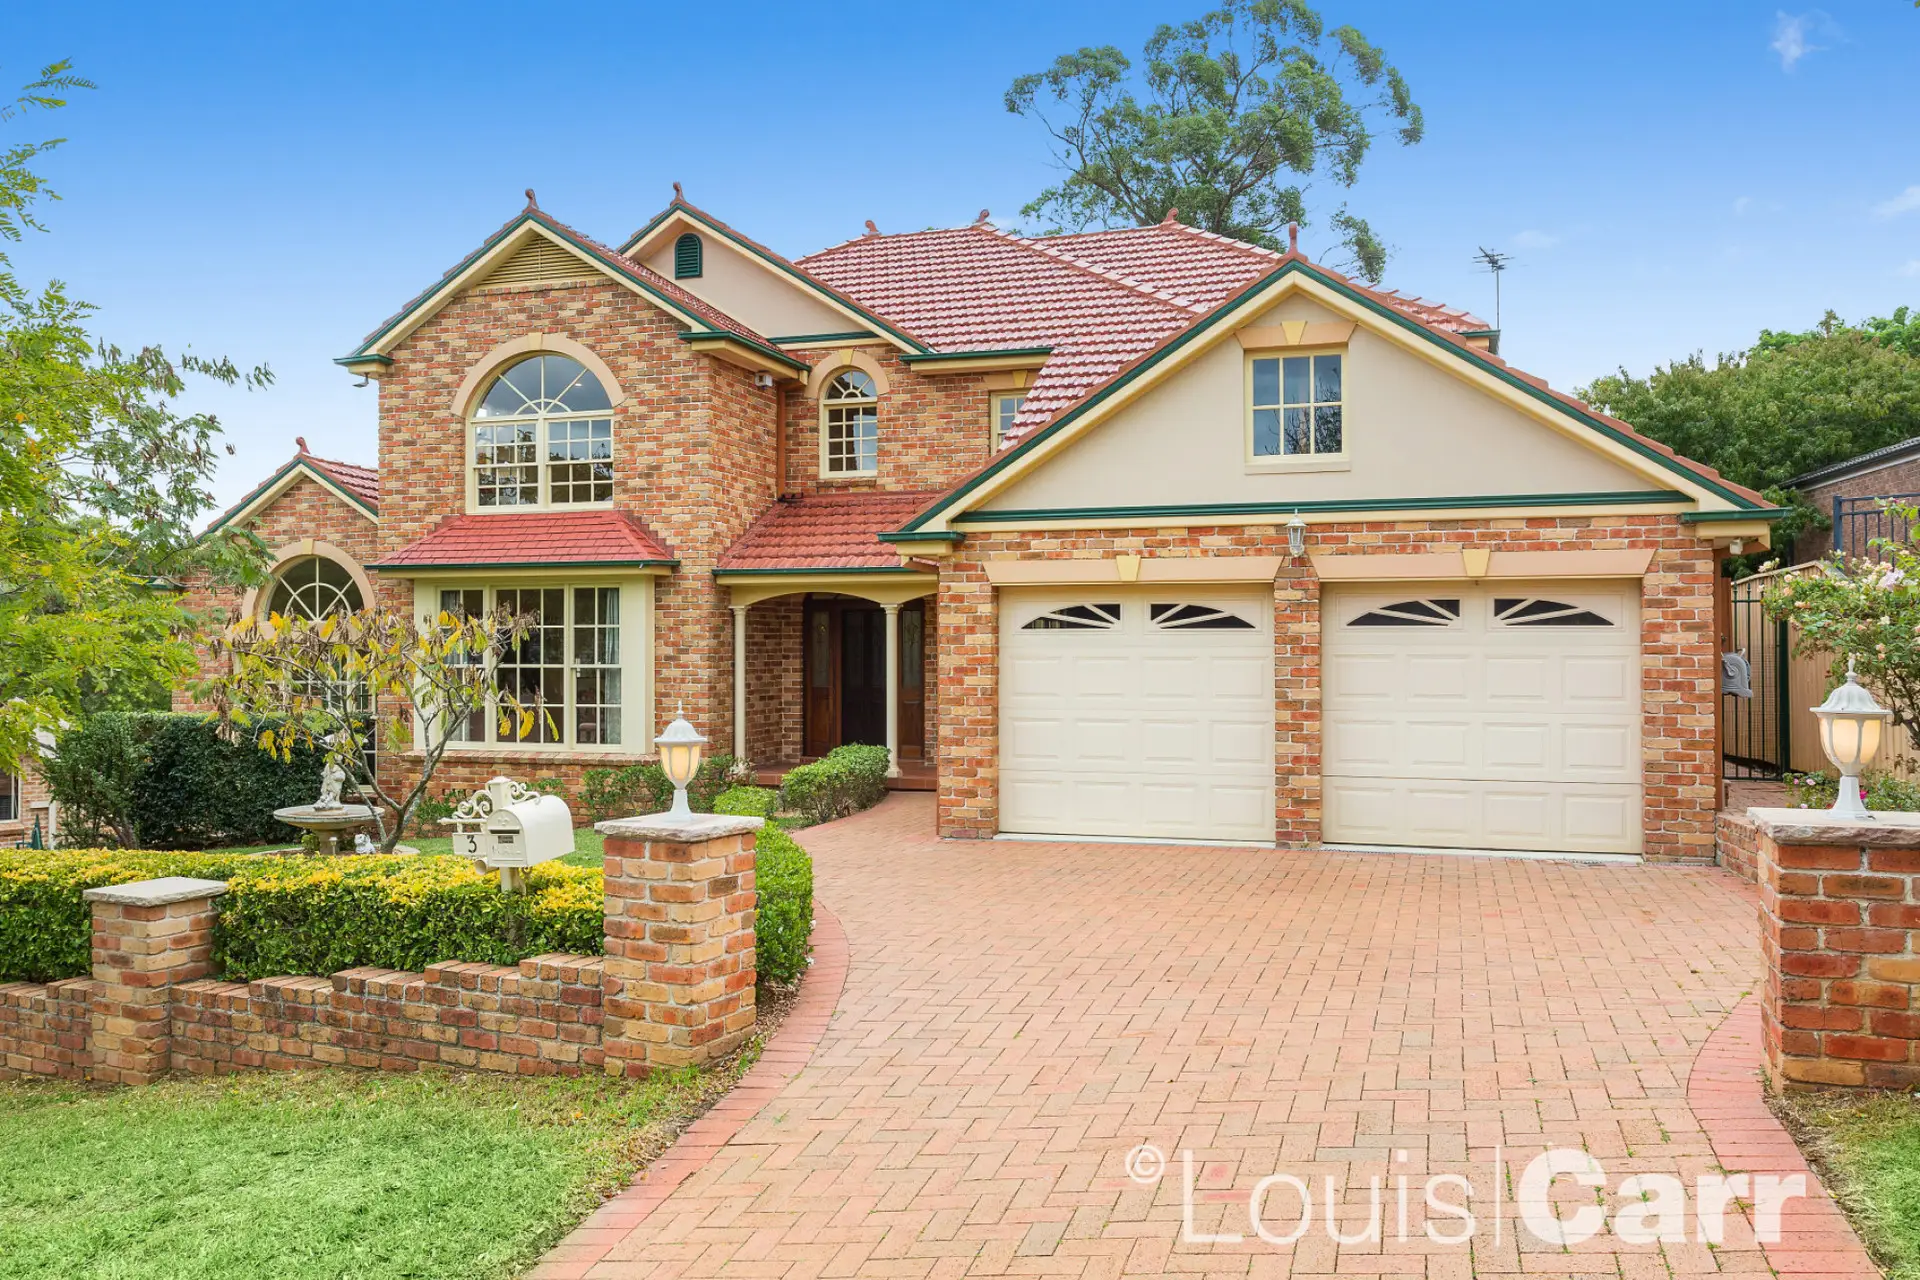 Photo #1: 3 Josephine Crescent, Cherrybrook - Sold by Louis Carr Real Estate